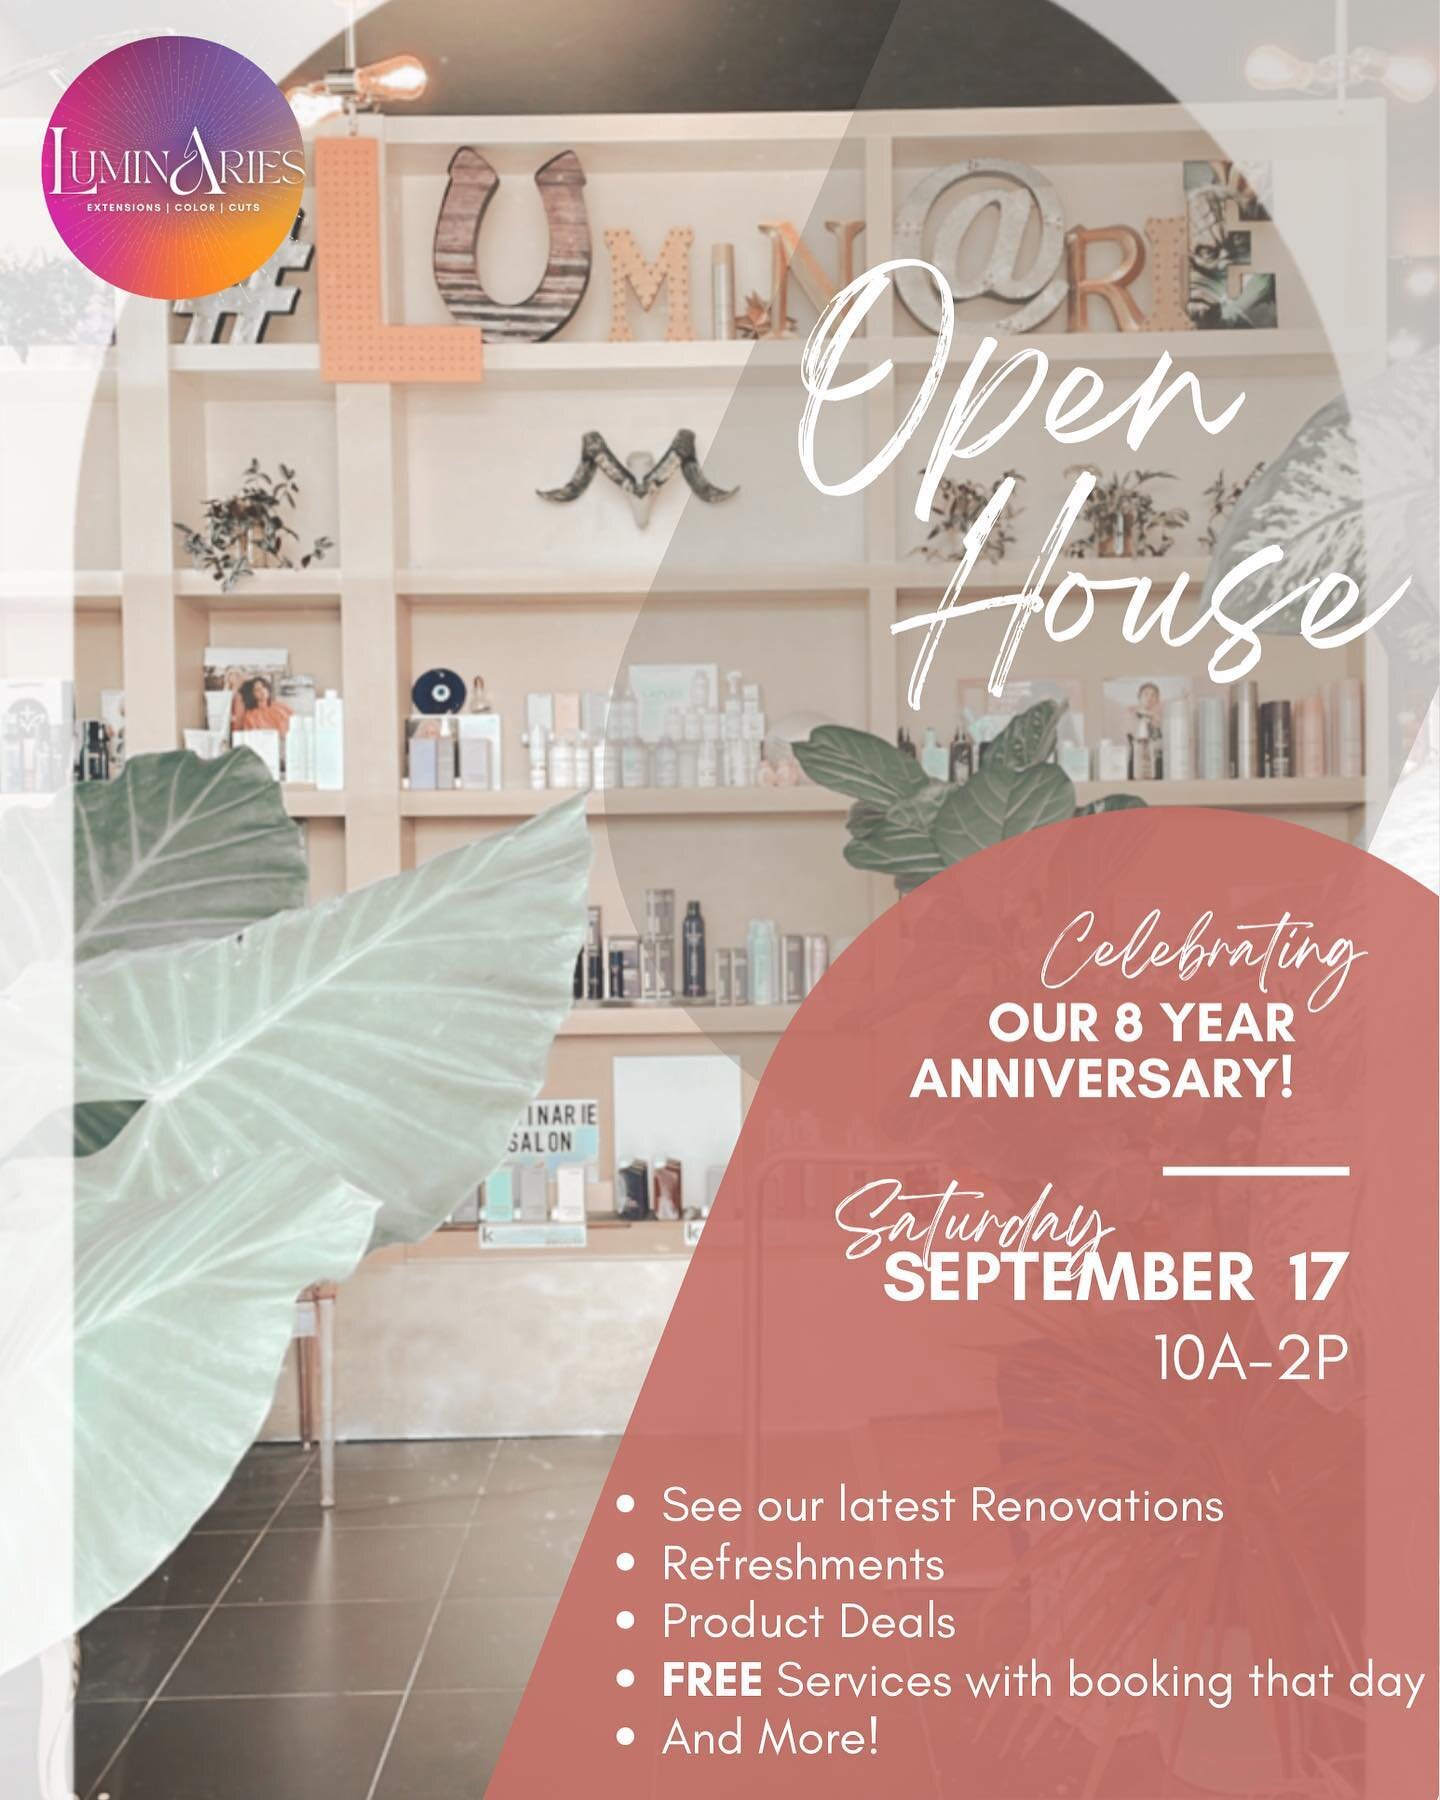 SAVE THE DATE &bull; Saturday,
September 17th from 10-2 we are hosting our &ldquo;8th Anniversary Open House&rdquo;. 

Come check out our latest renovations, enjoy refreshments, take advantage of product deals and FREE services when you Book in perso